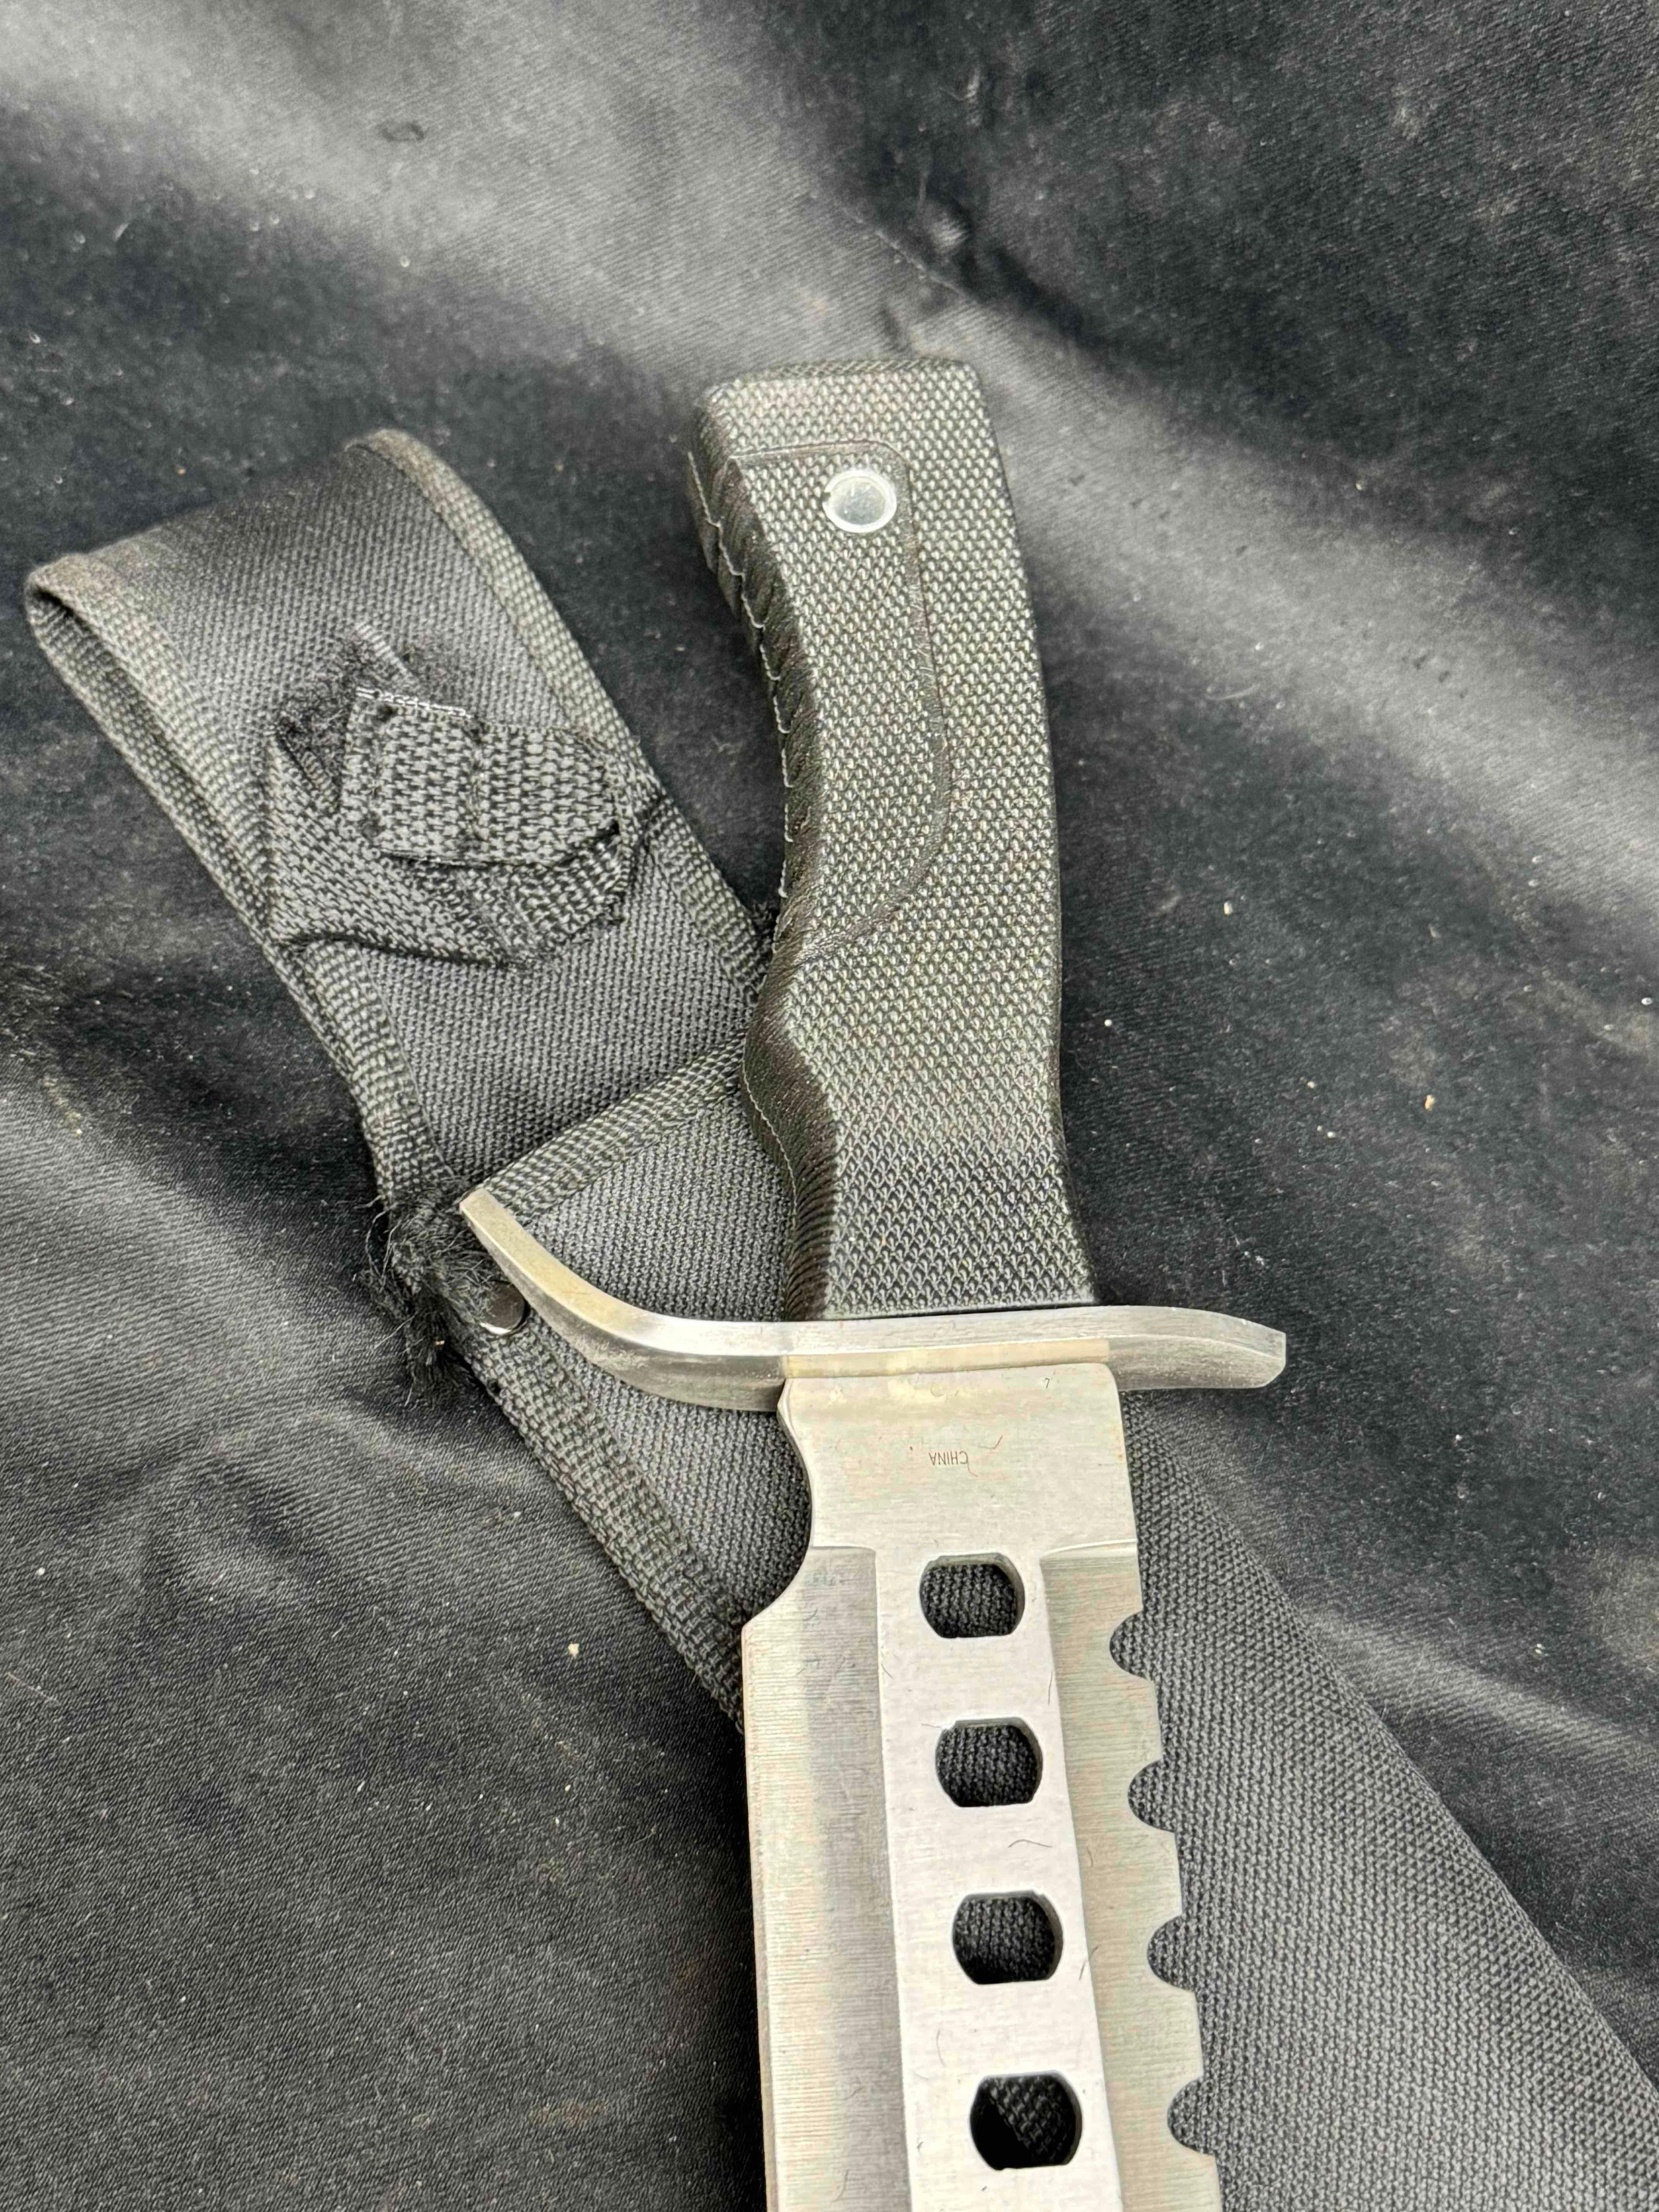 Large Frost USA Knife with Sheath